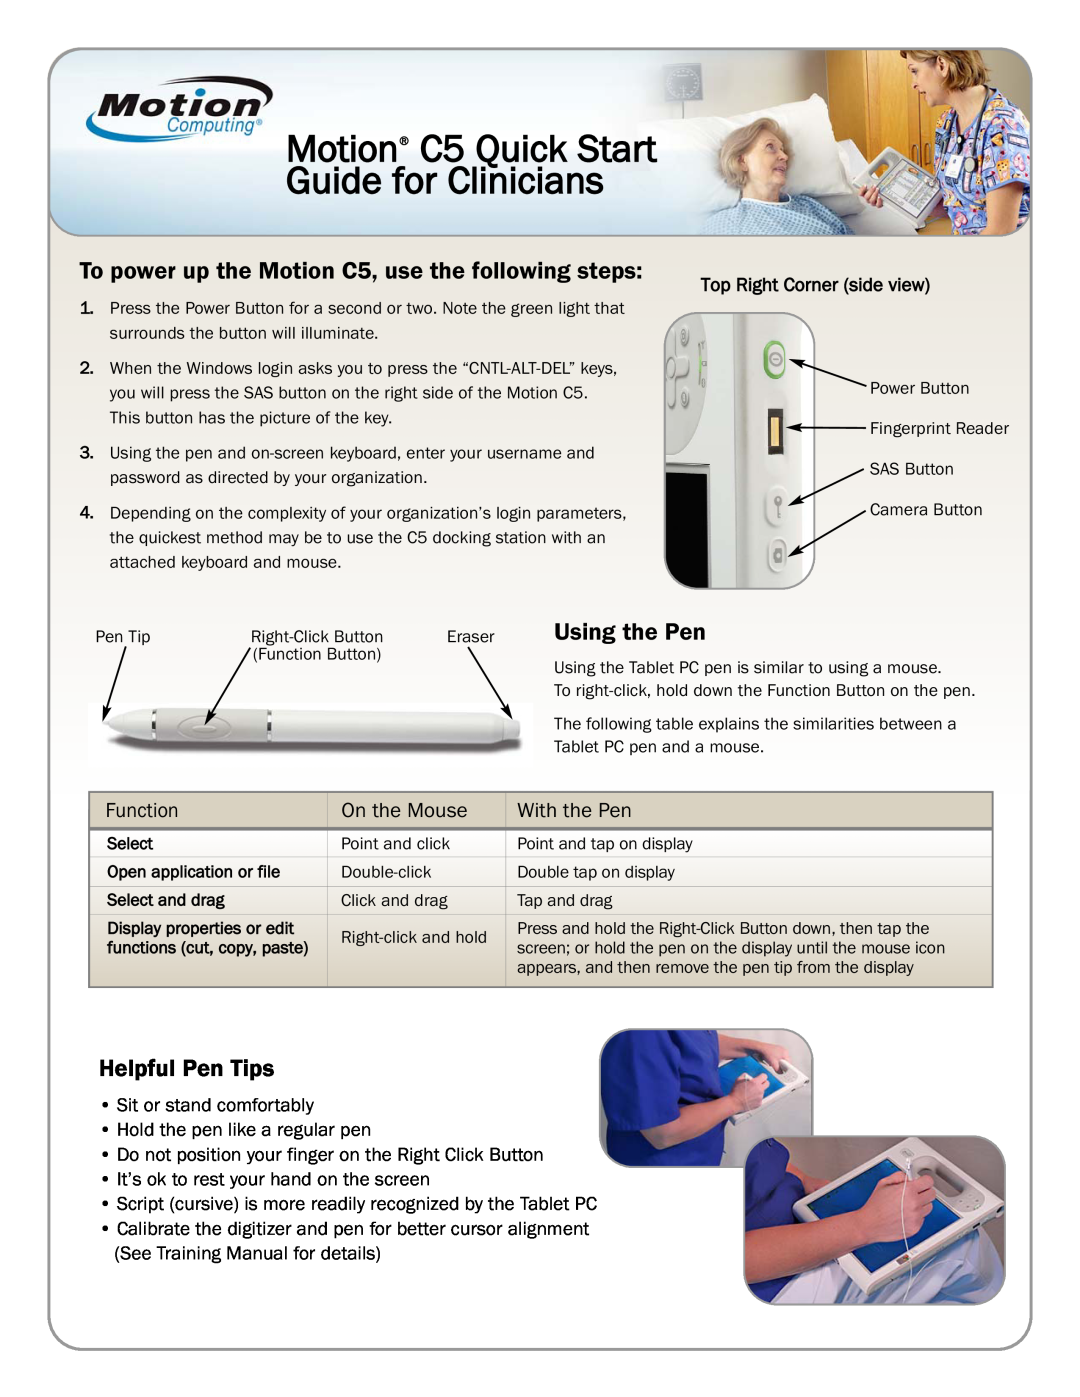 Motion Computing manual Motion C5 Quick Start Guide for Clinicians, To power up the Motion C5, use the following steps 